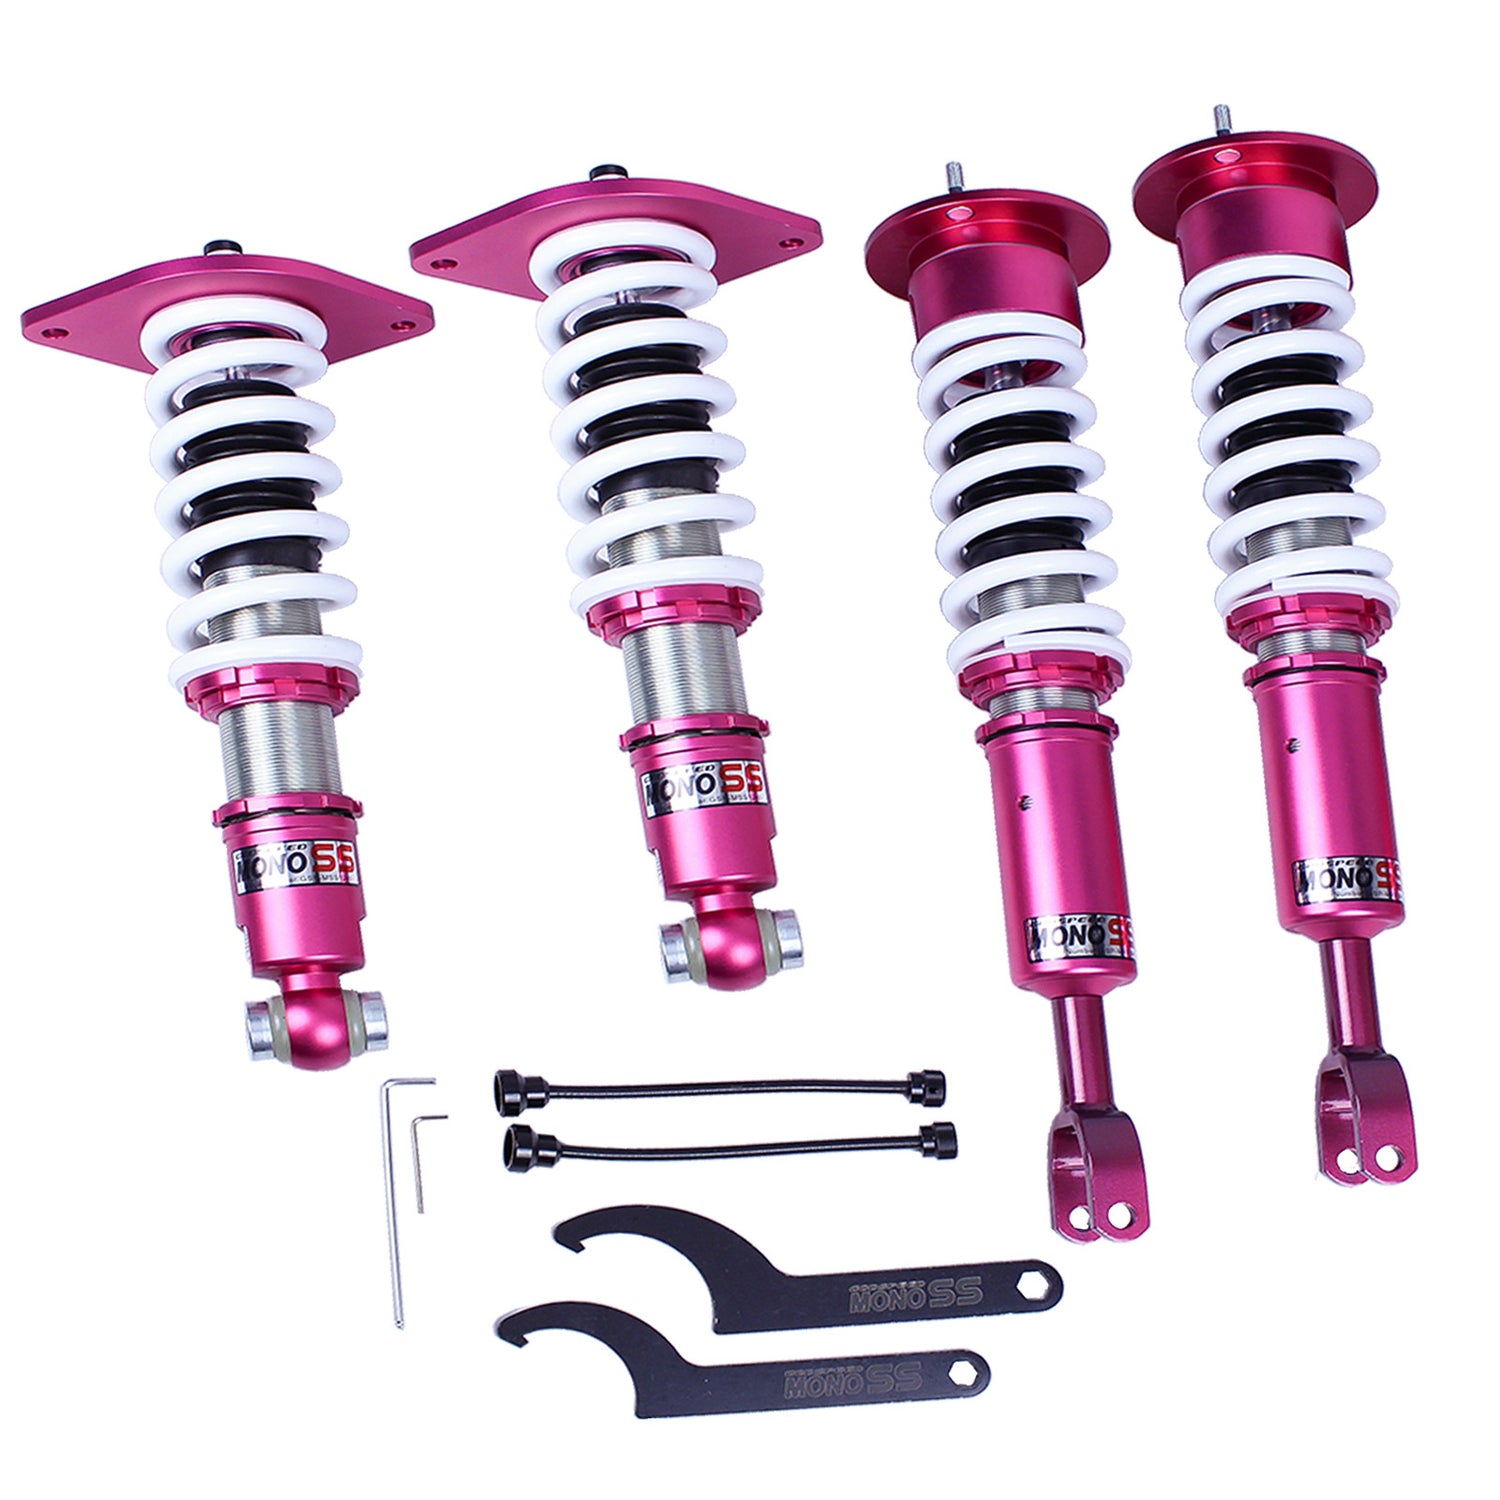 Godspeed MSS1040 MonoSS Coilover Lowering Kit, Fully Adjustable, Ride Height, Spring Tension And 16 Click Damping, Audi A6 Quattro(C5) 1997-04